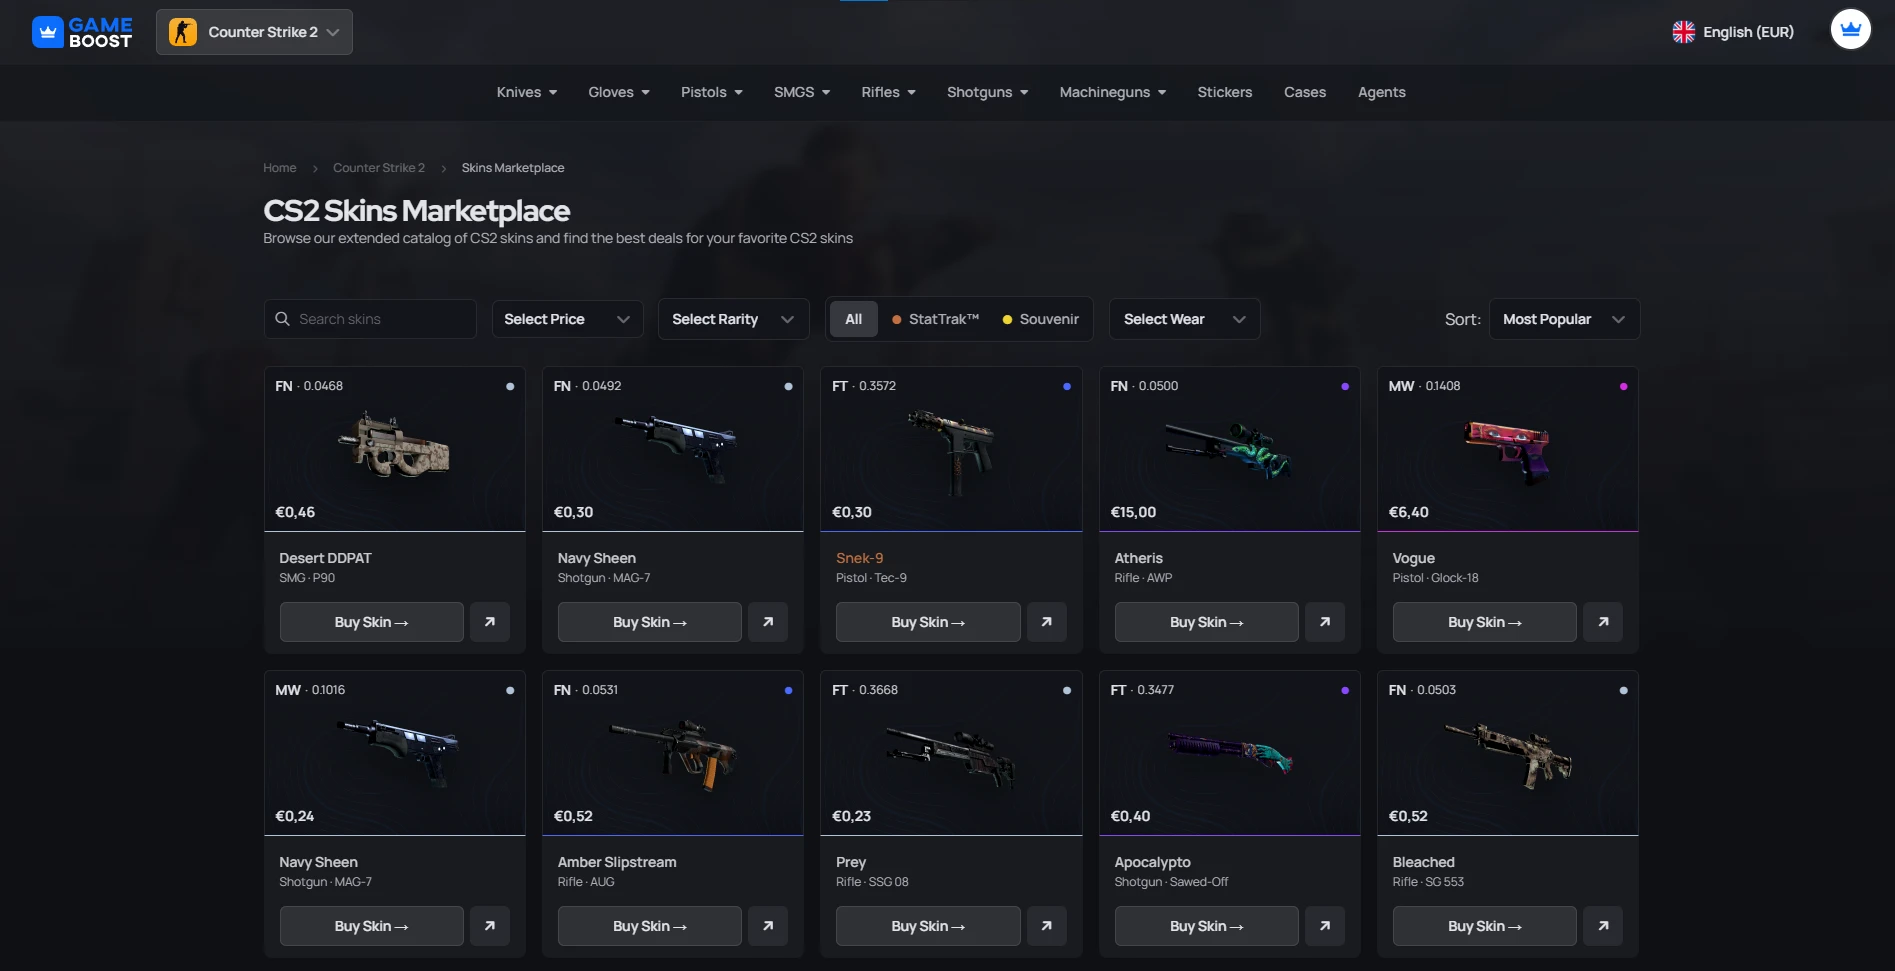 screenshot from gameboost.com CS2 marketplace page